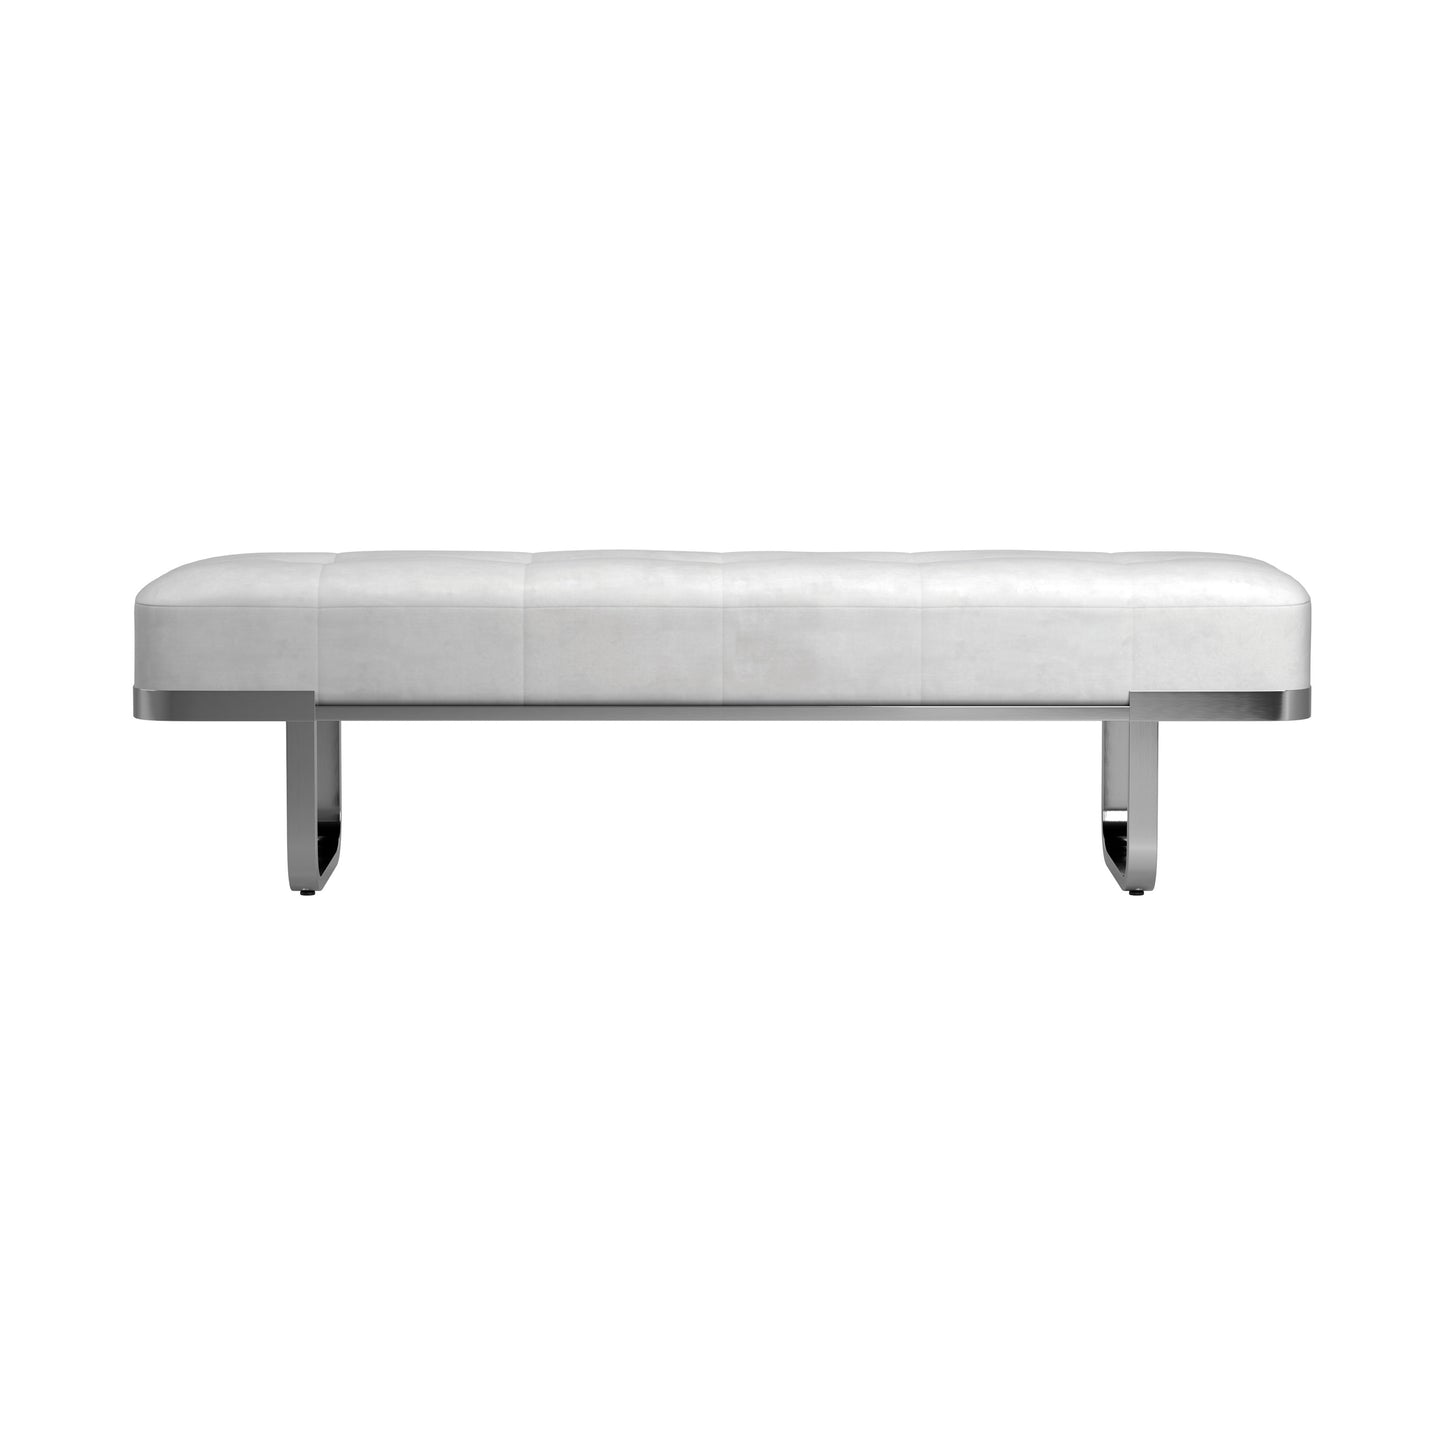 Tufted Upholstered Bench Off White and Chrome